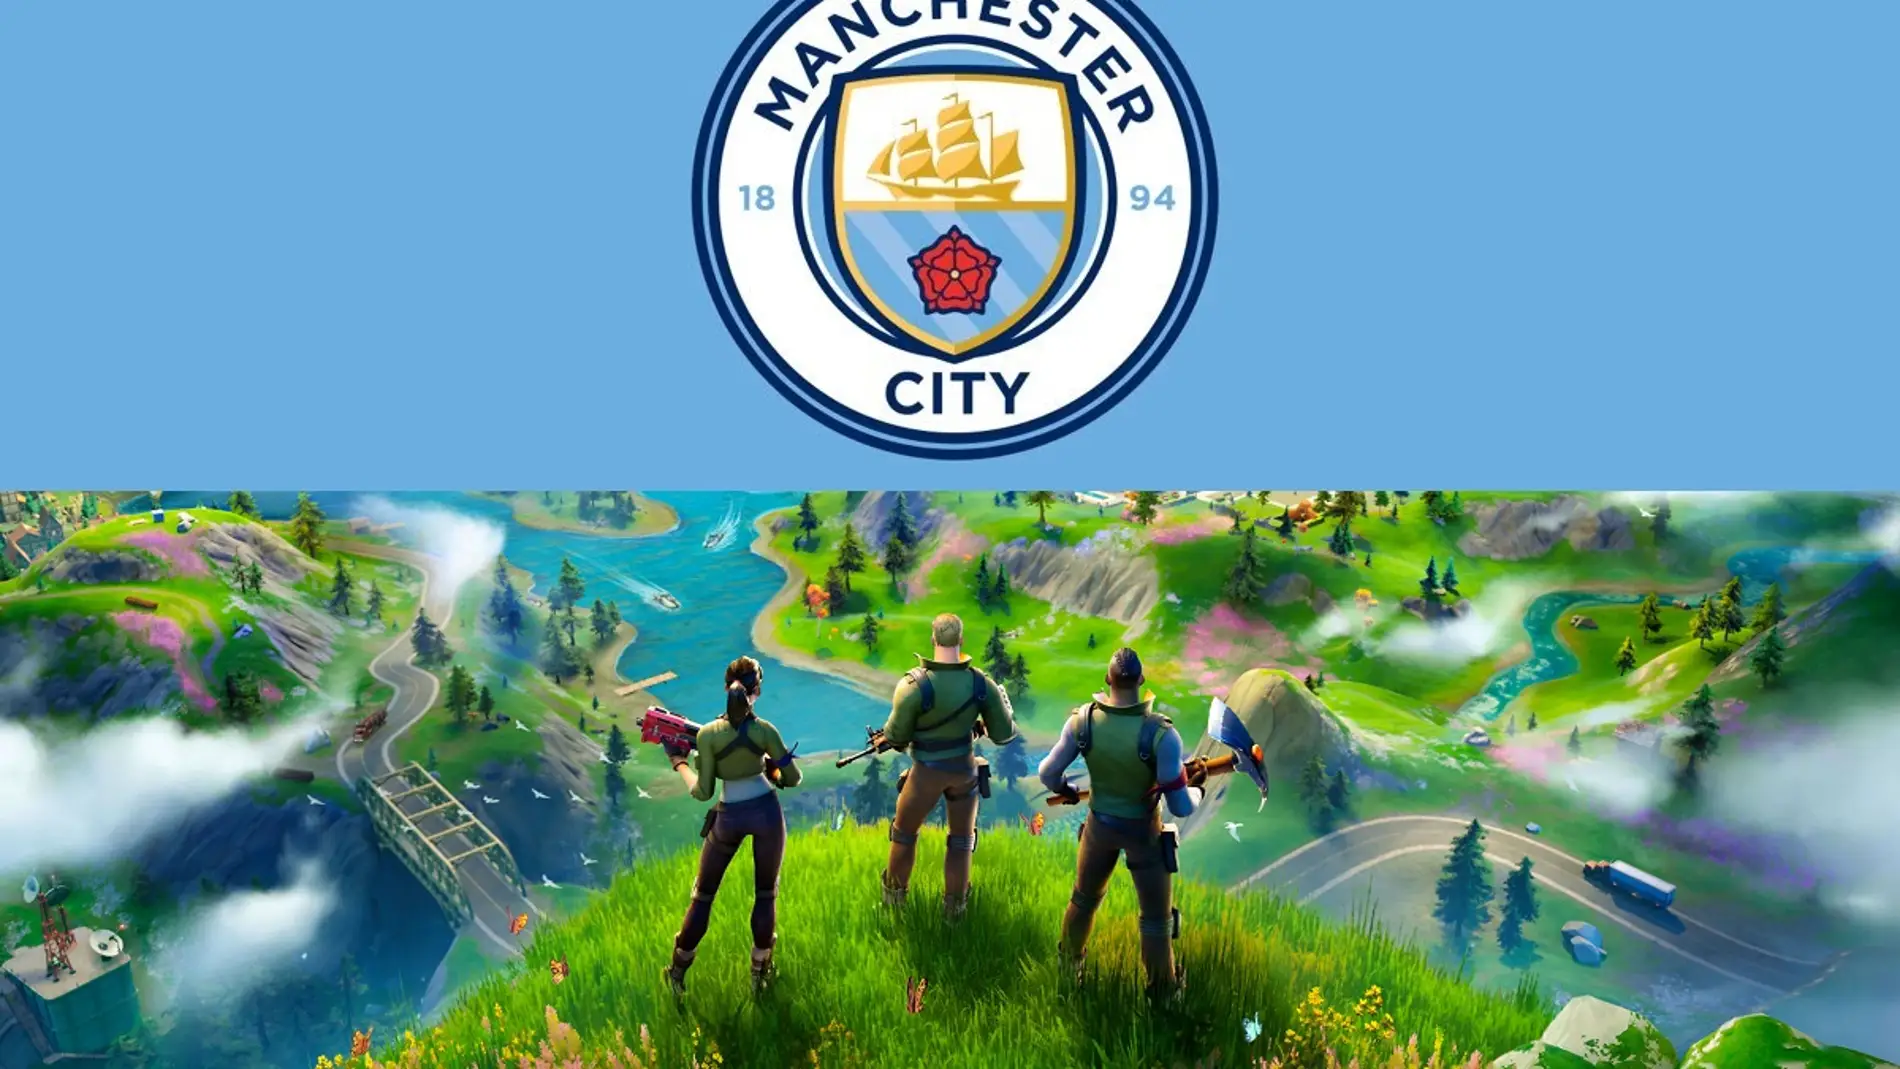 Fortnite y Manchester City